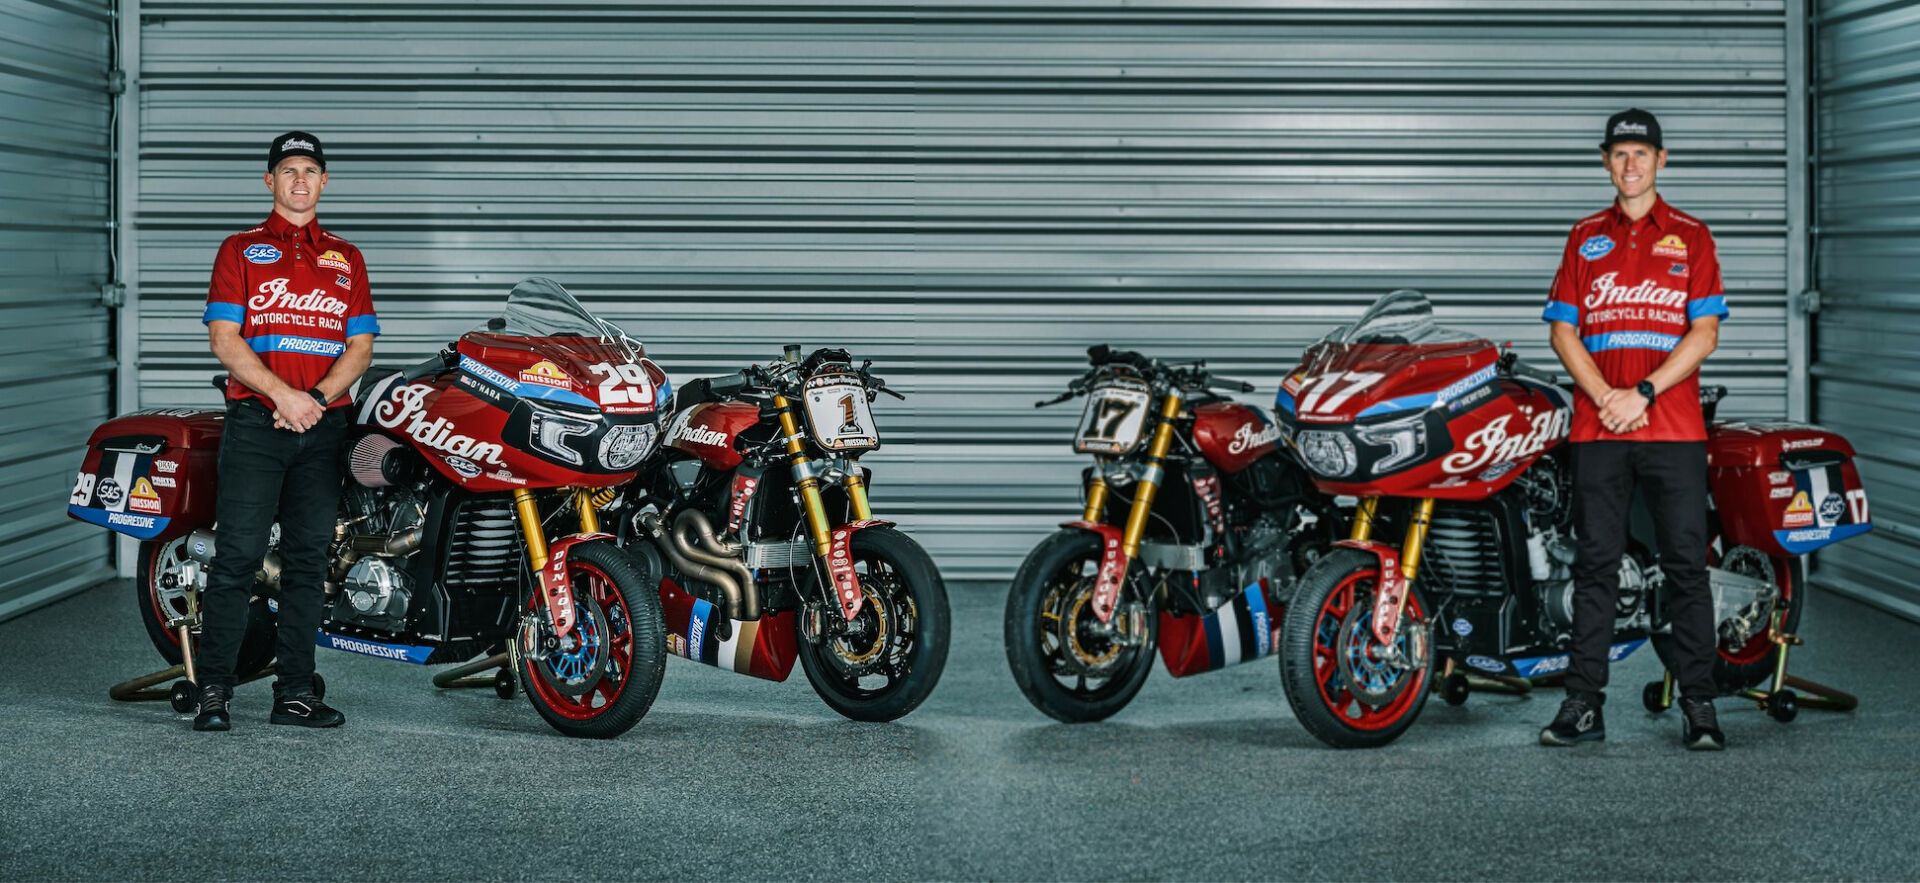 Tyler O'Hara (left) and Troy Herfoss (right) and their S&S Indian racebikes. Photo courtesy Indian Motorcycle.